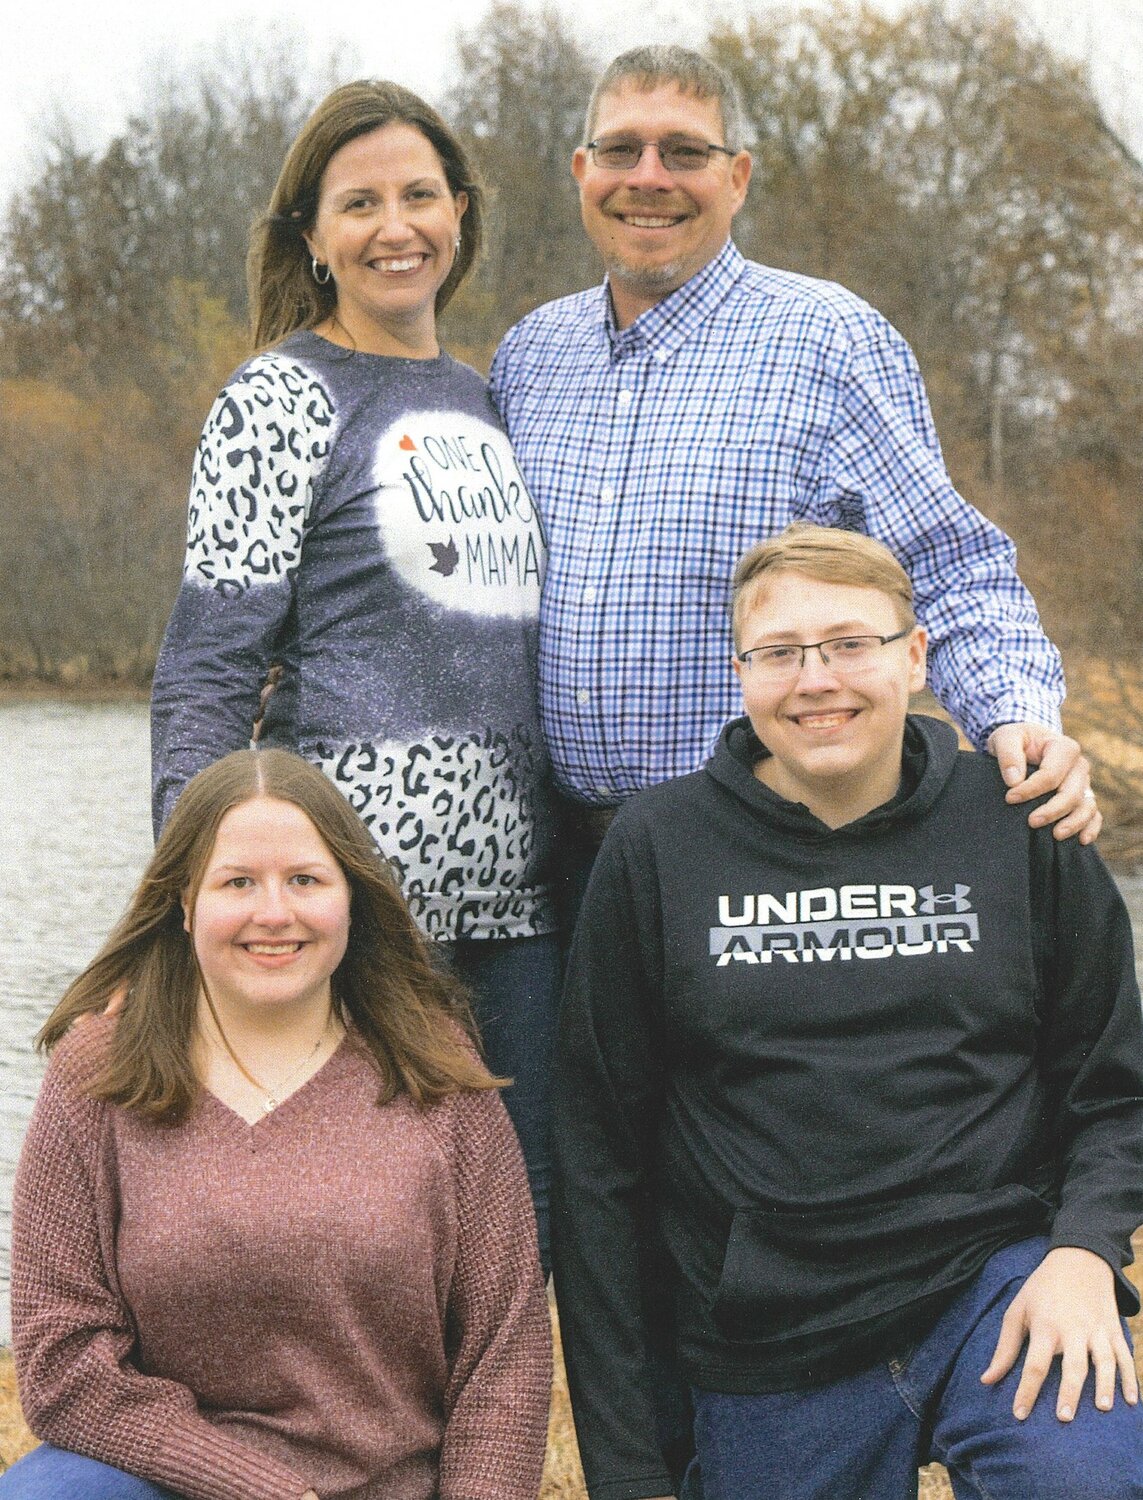 Danielle Freie and her family, Chad, Darcci and Devan Freie.